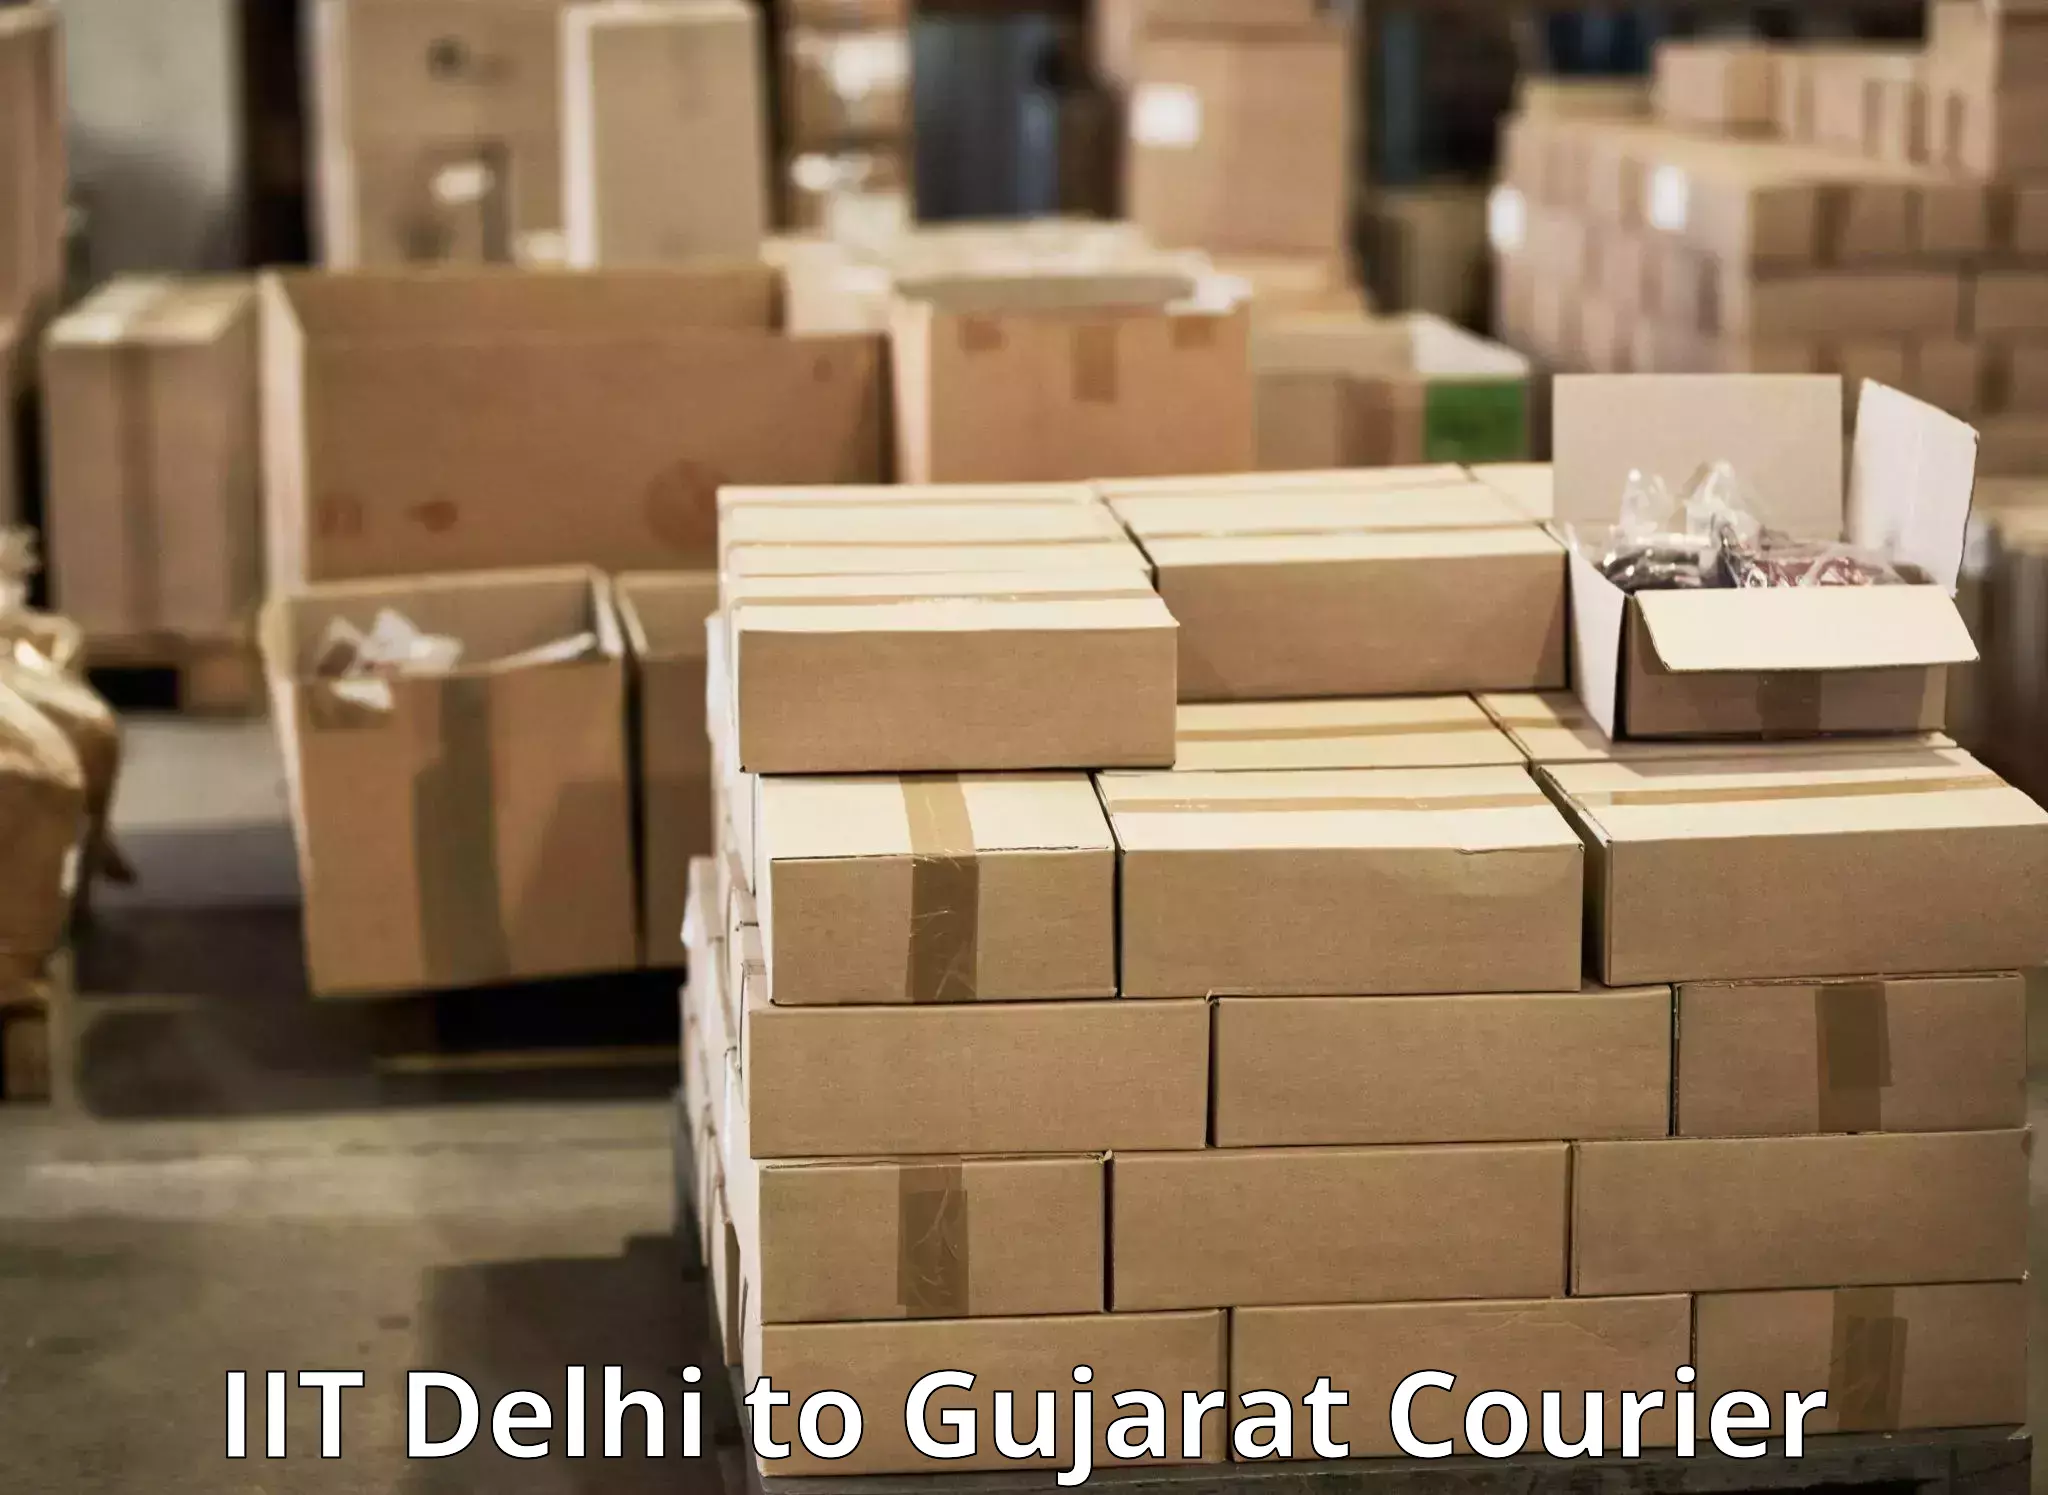 Courier service partnerships IIT Delhi to Dhasa